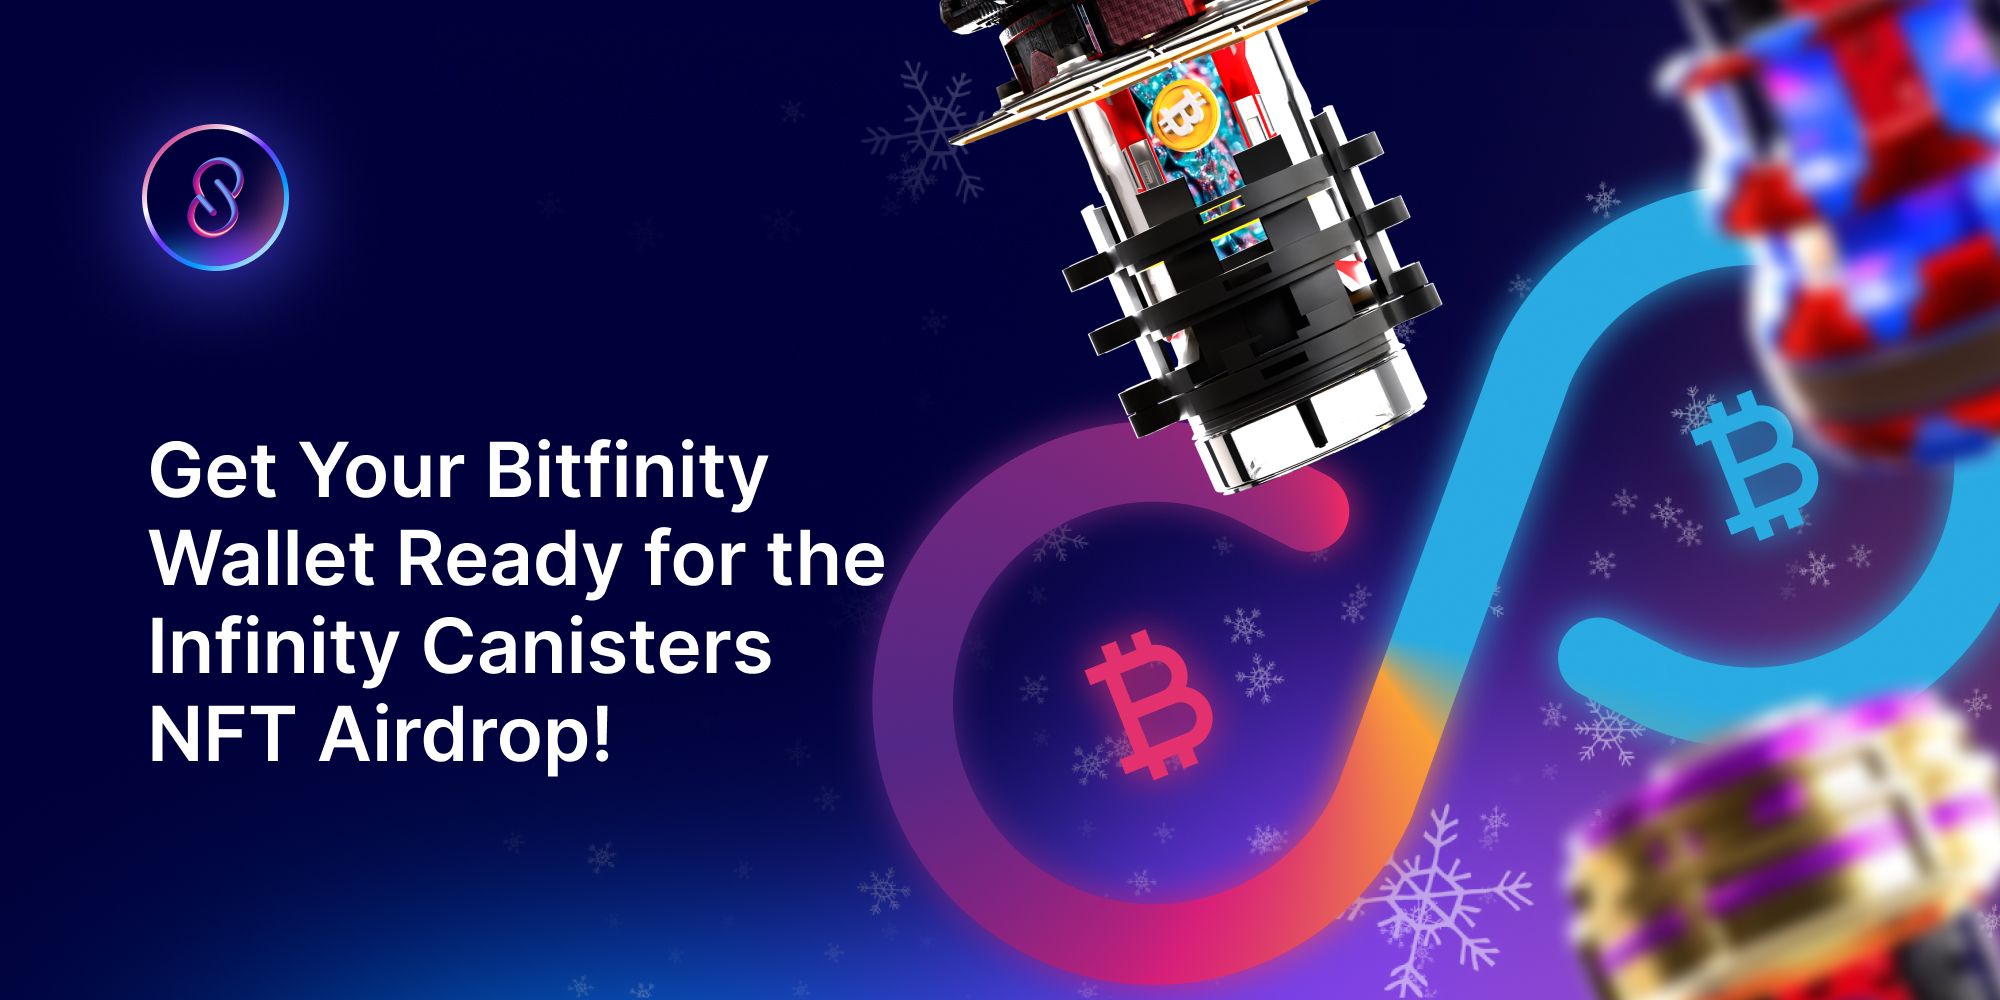 Get Your Bitfinity Wallet Ready for the Infinity Canisters NFT Airdrop!